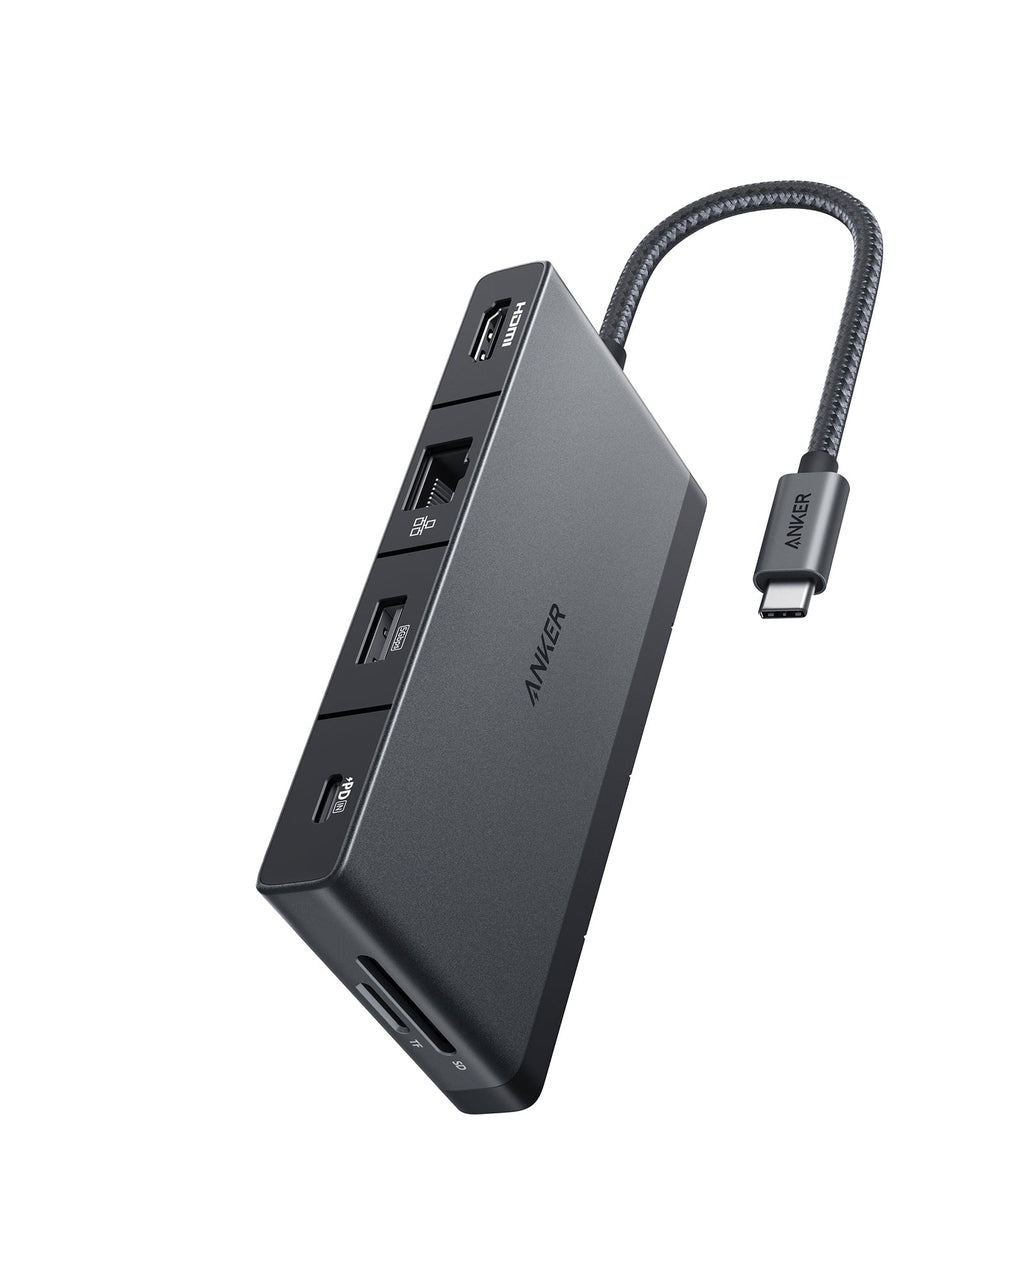 Anker USB C Hub Adapter, PowerExpand+ 7-in-1 USB C Hub, with 4K USB C to  HDMI, 60W Power Delivery, 1Gbps Ethernet